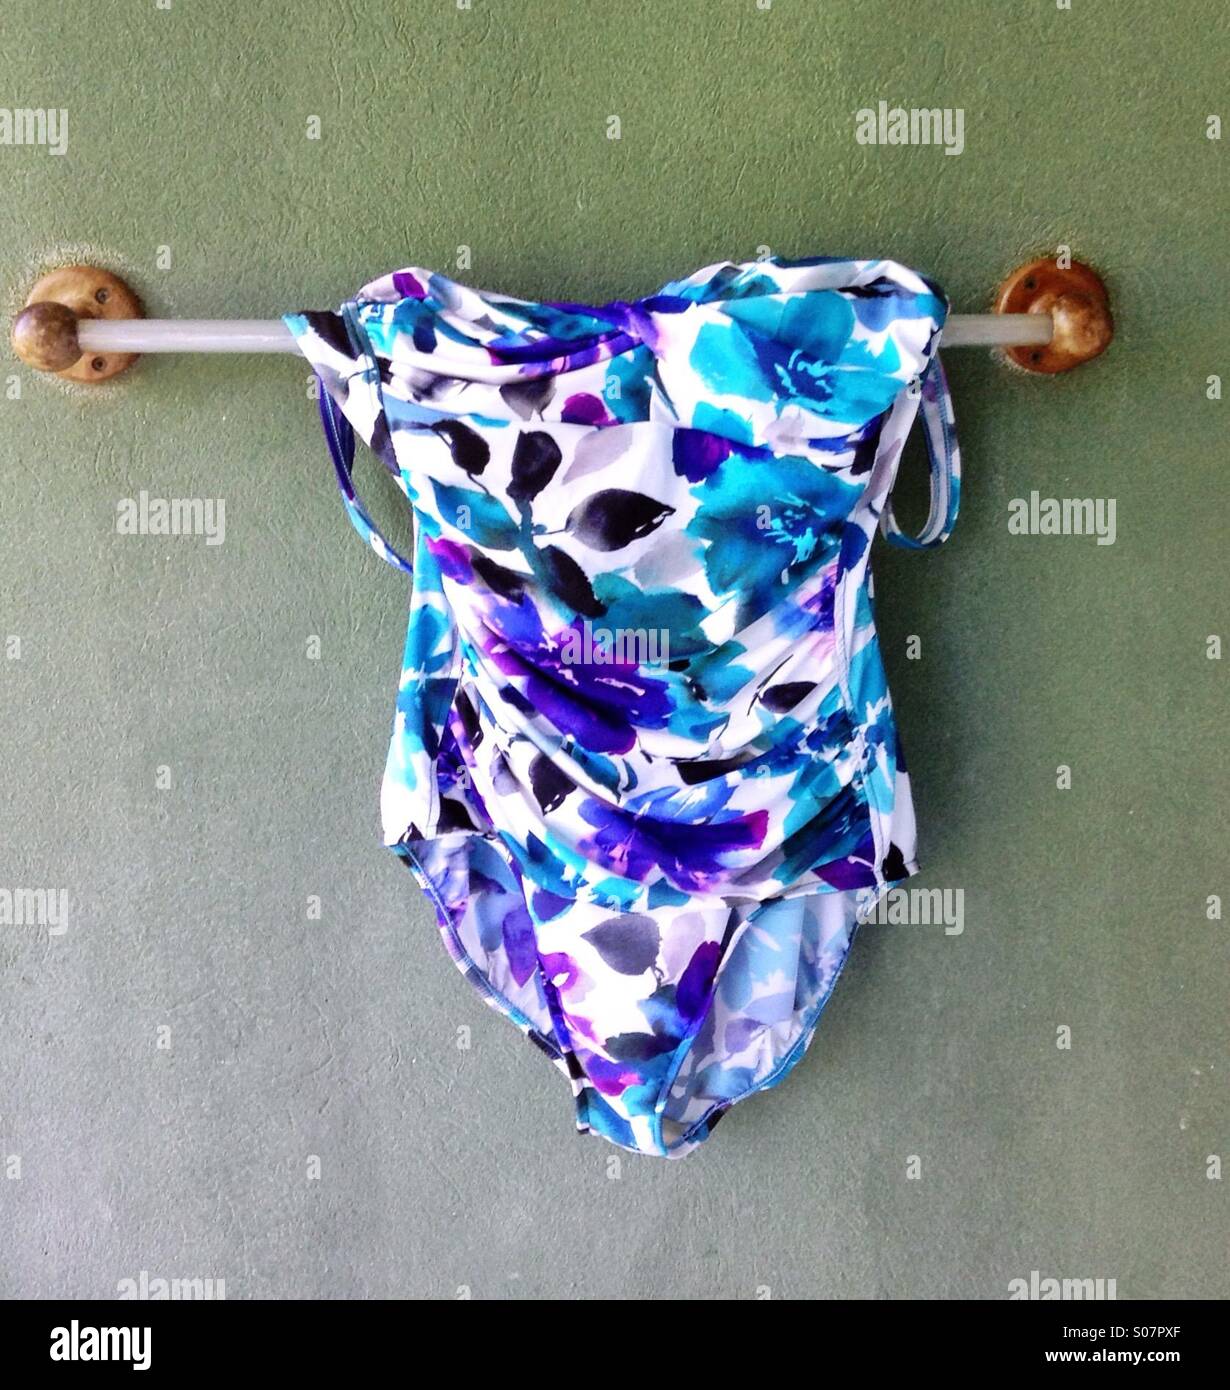 Bathing suit drying on an outside rack. Stock Photo